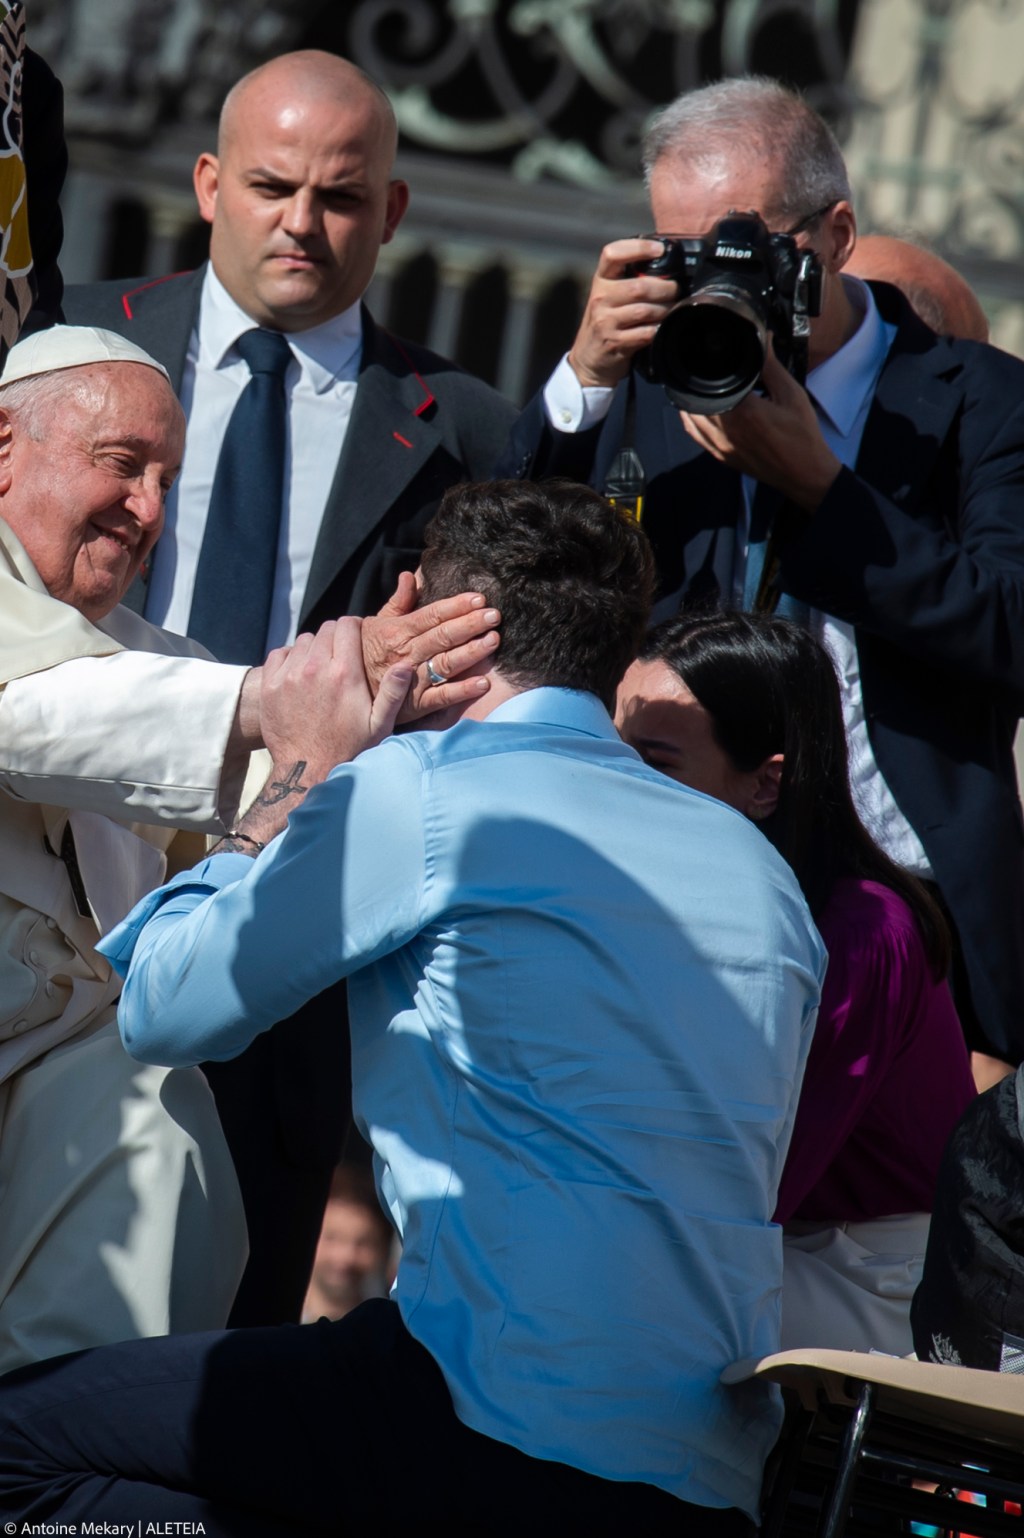 Pope Francis blesses a couple at the conclusion of his weekly general audience.